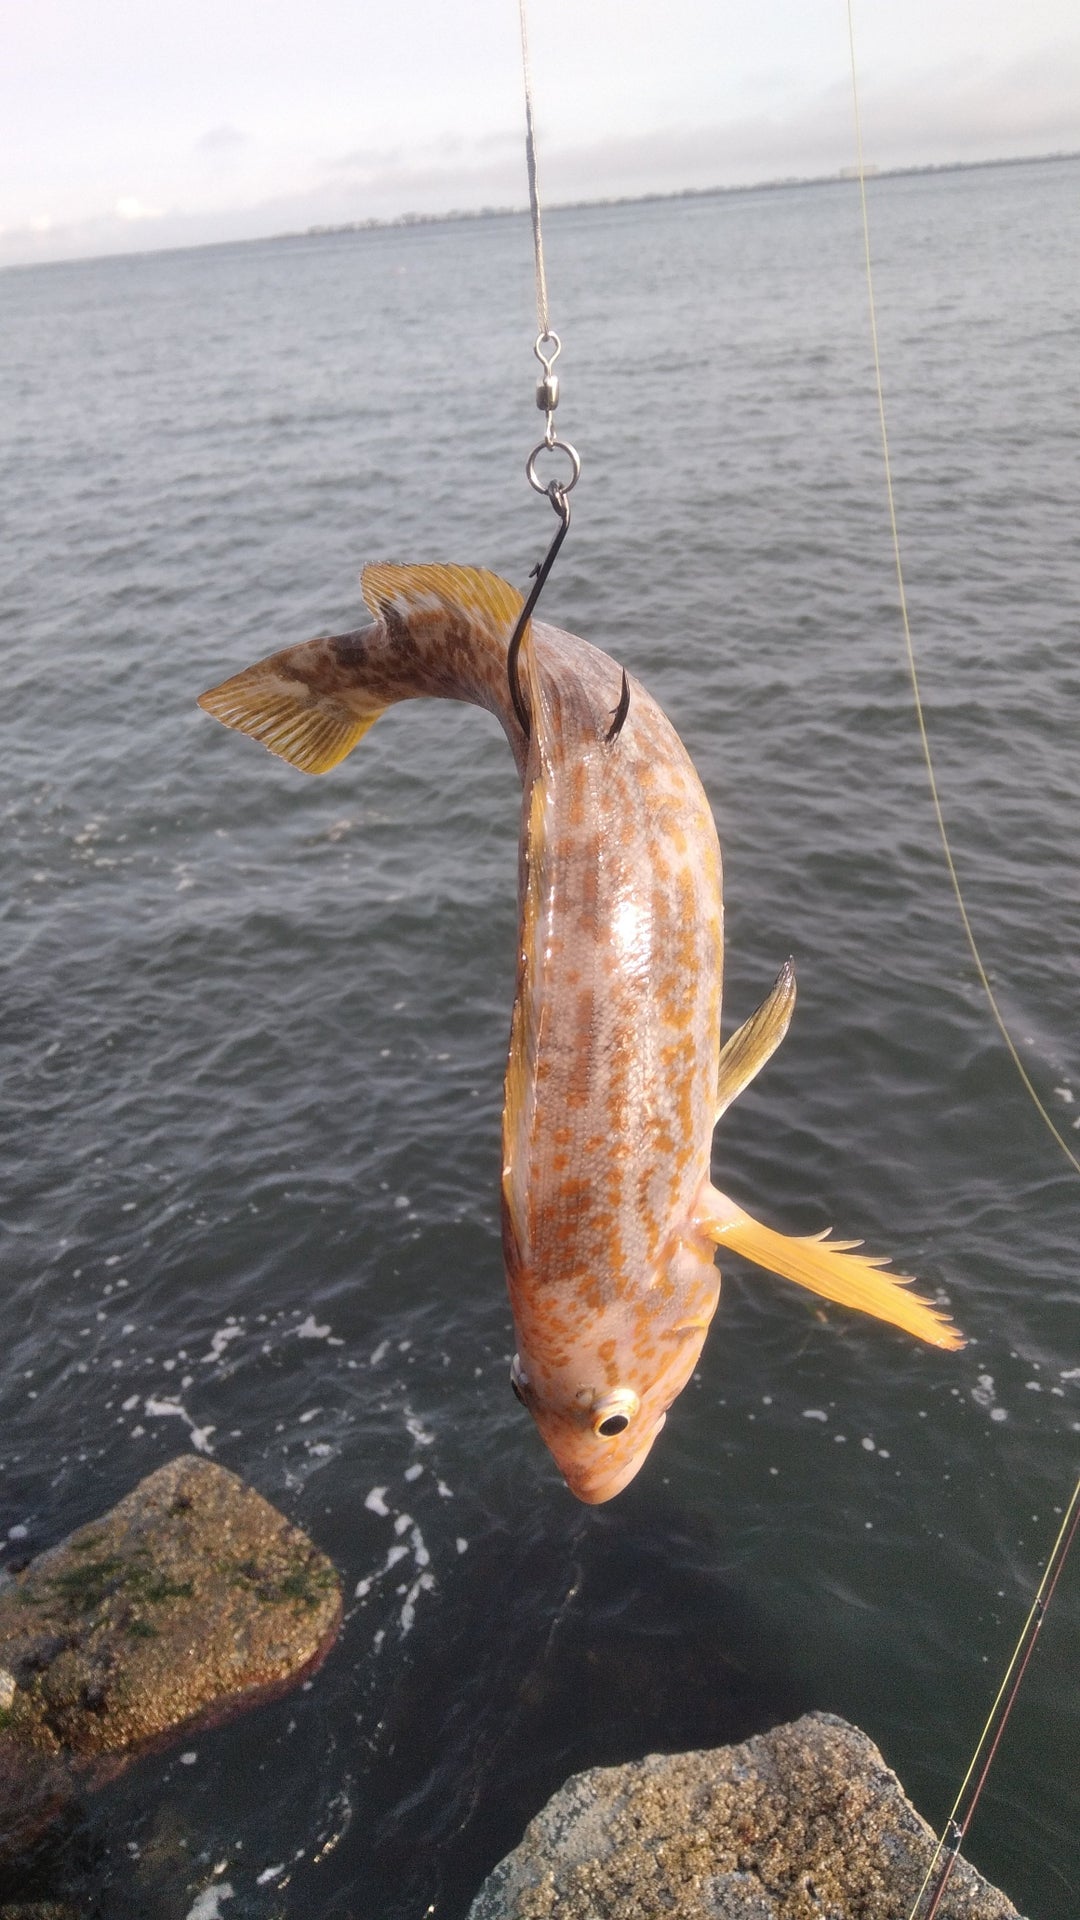 Fishing a live bait (greenling/rockfish/perch) for a lingcod on